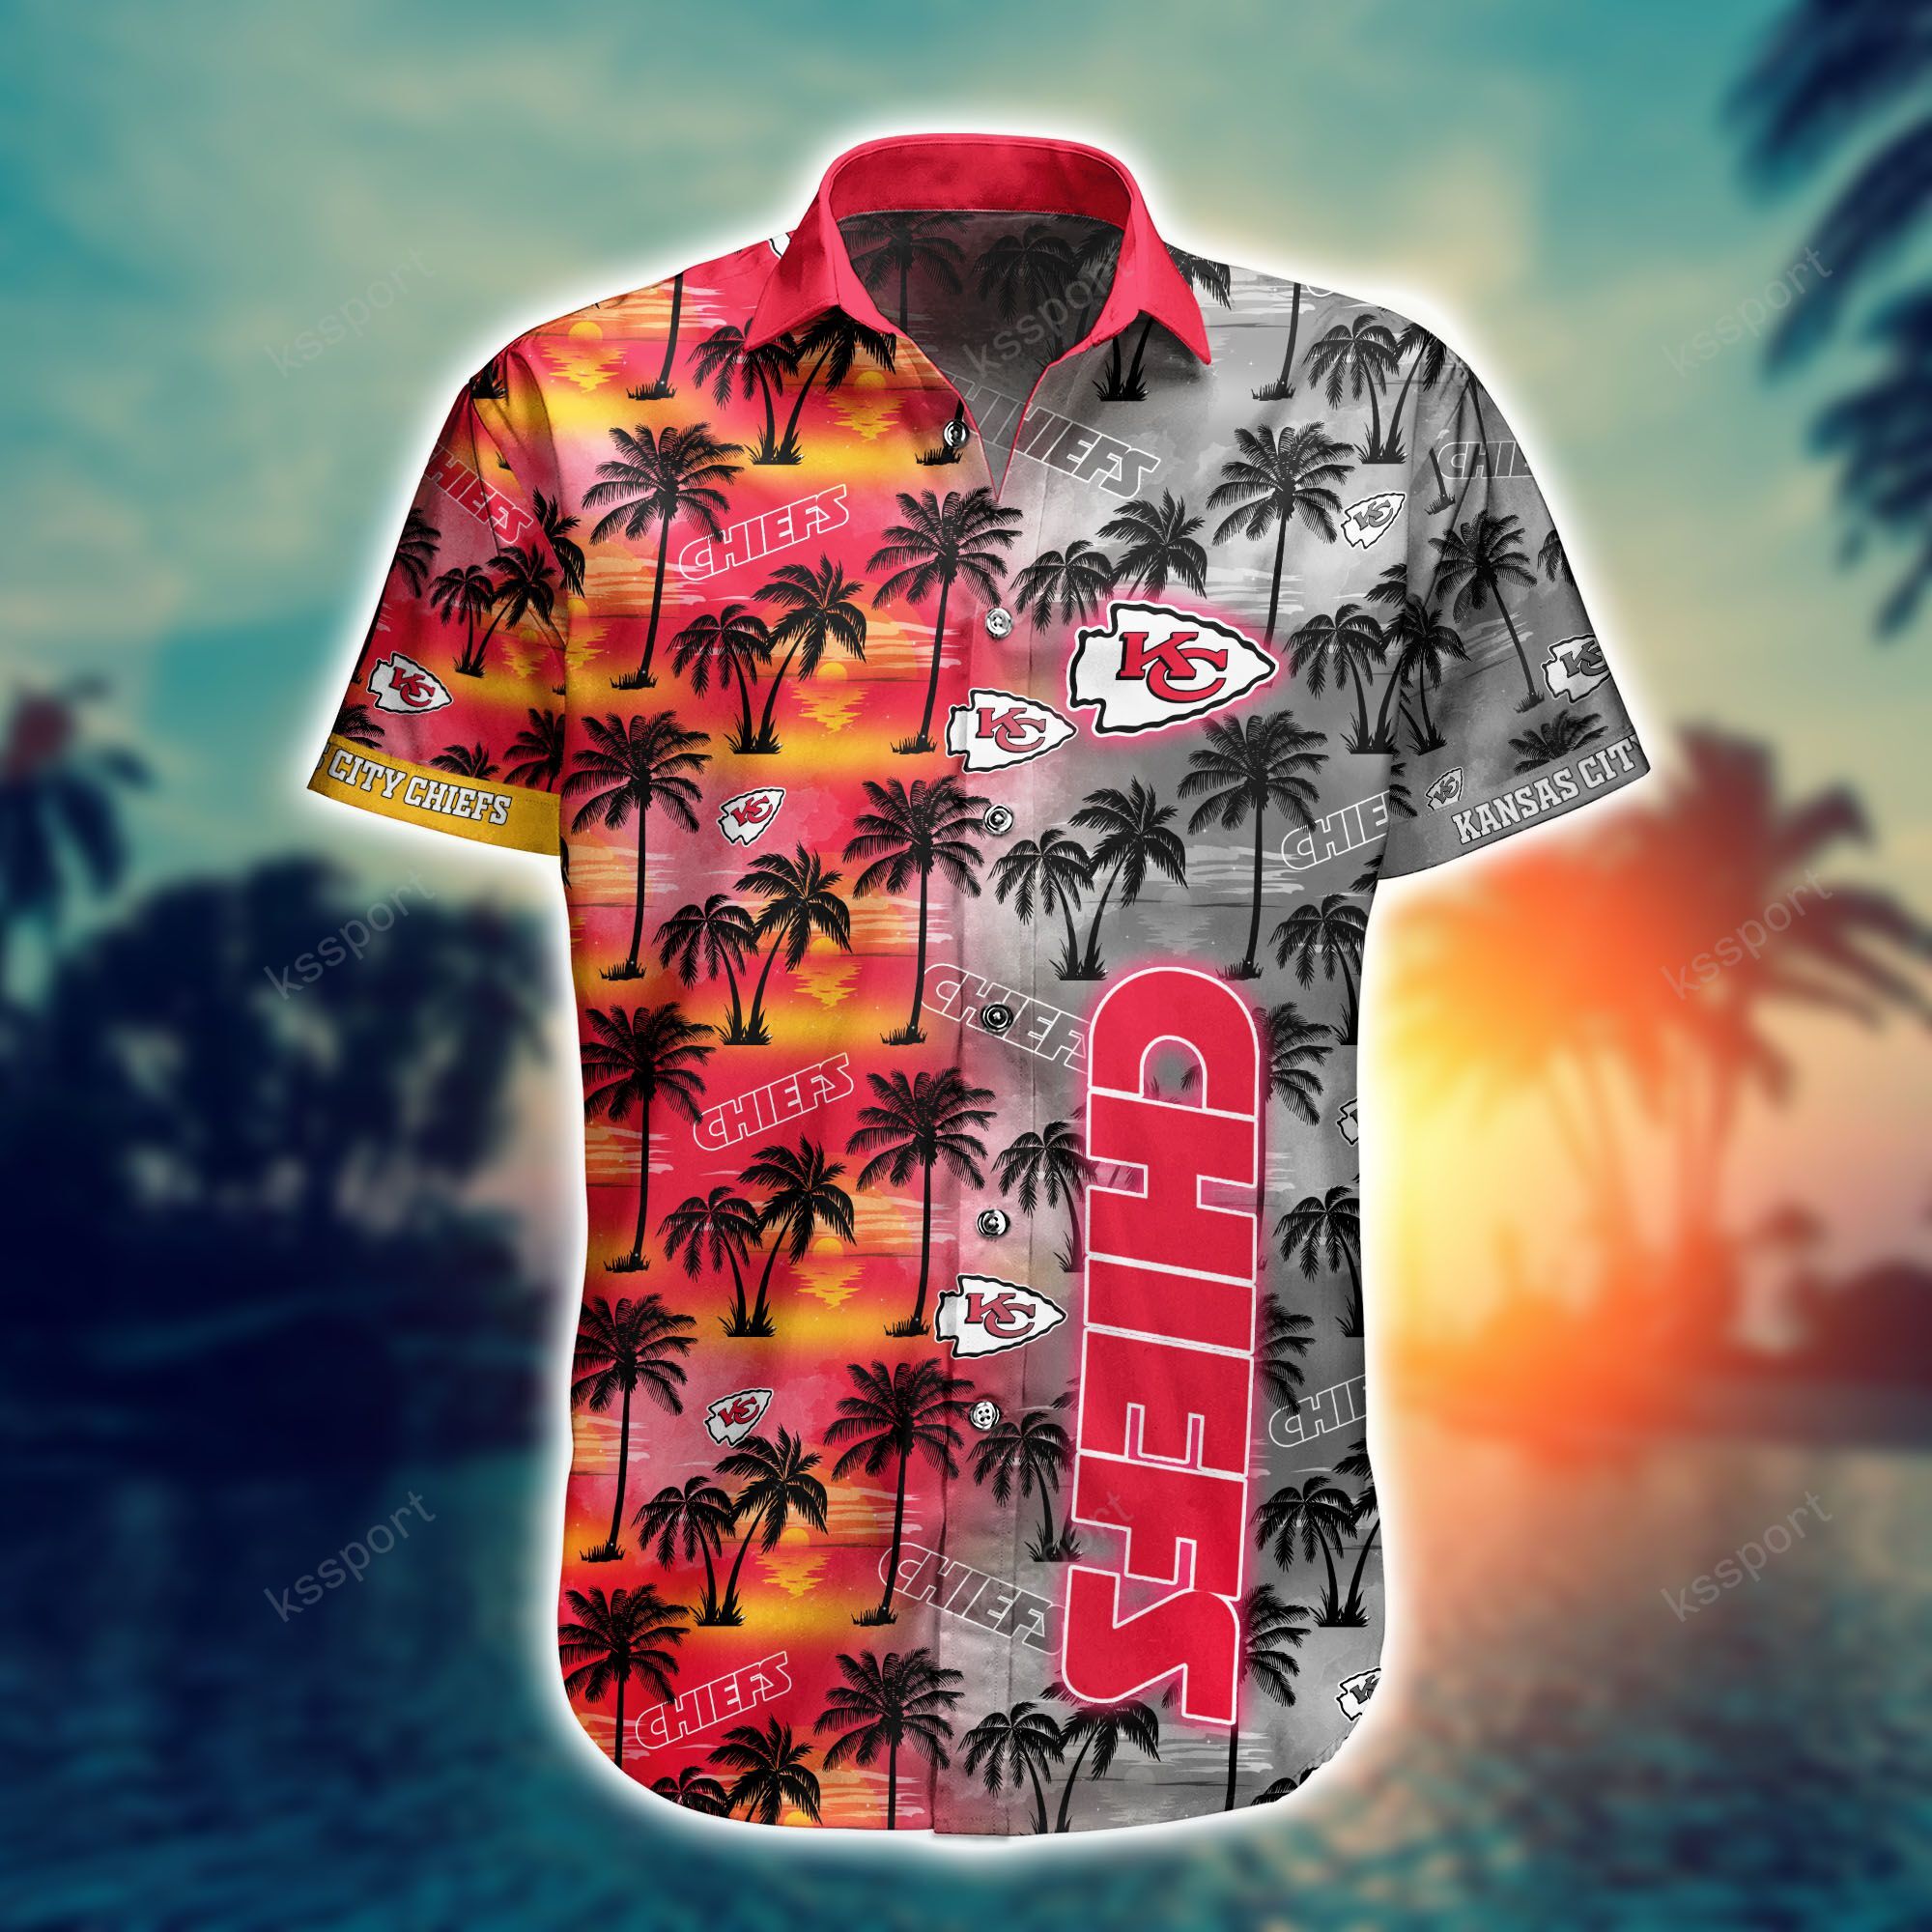 Top cool Hawaiian shirt 2022 - Make sure you get yours today before they run out! 213